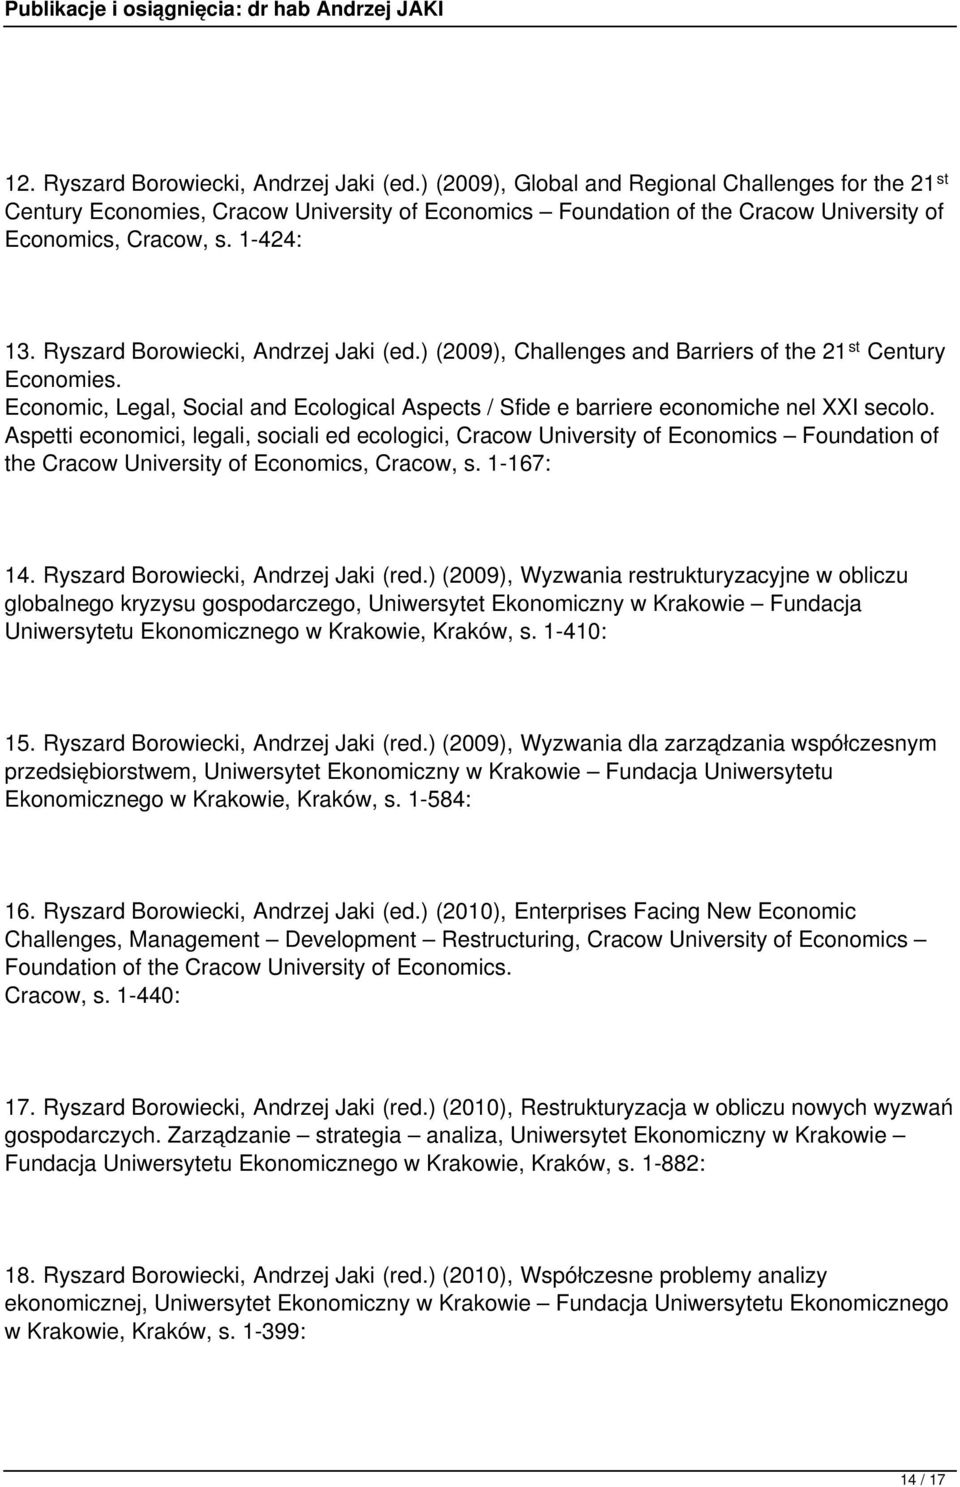 Ryszard Borowiecki, Andrzej Jaki (ed.) (2009), Challenges and Barriers of the 21 st Century Economies. Economic, Legal, Social and Ecological Aspects / Sfide e barriere economiche nel XXI secolo.